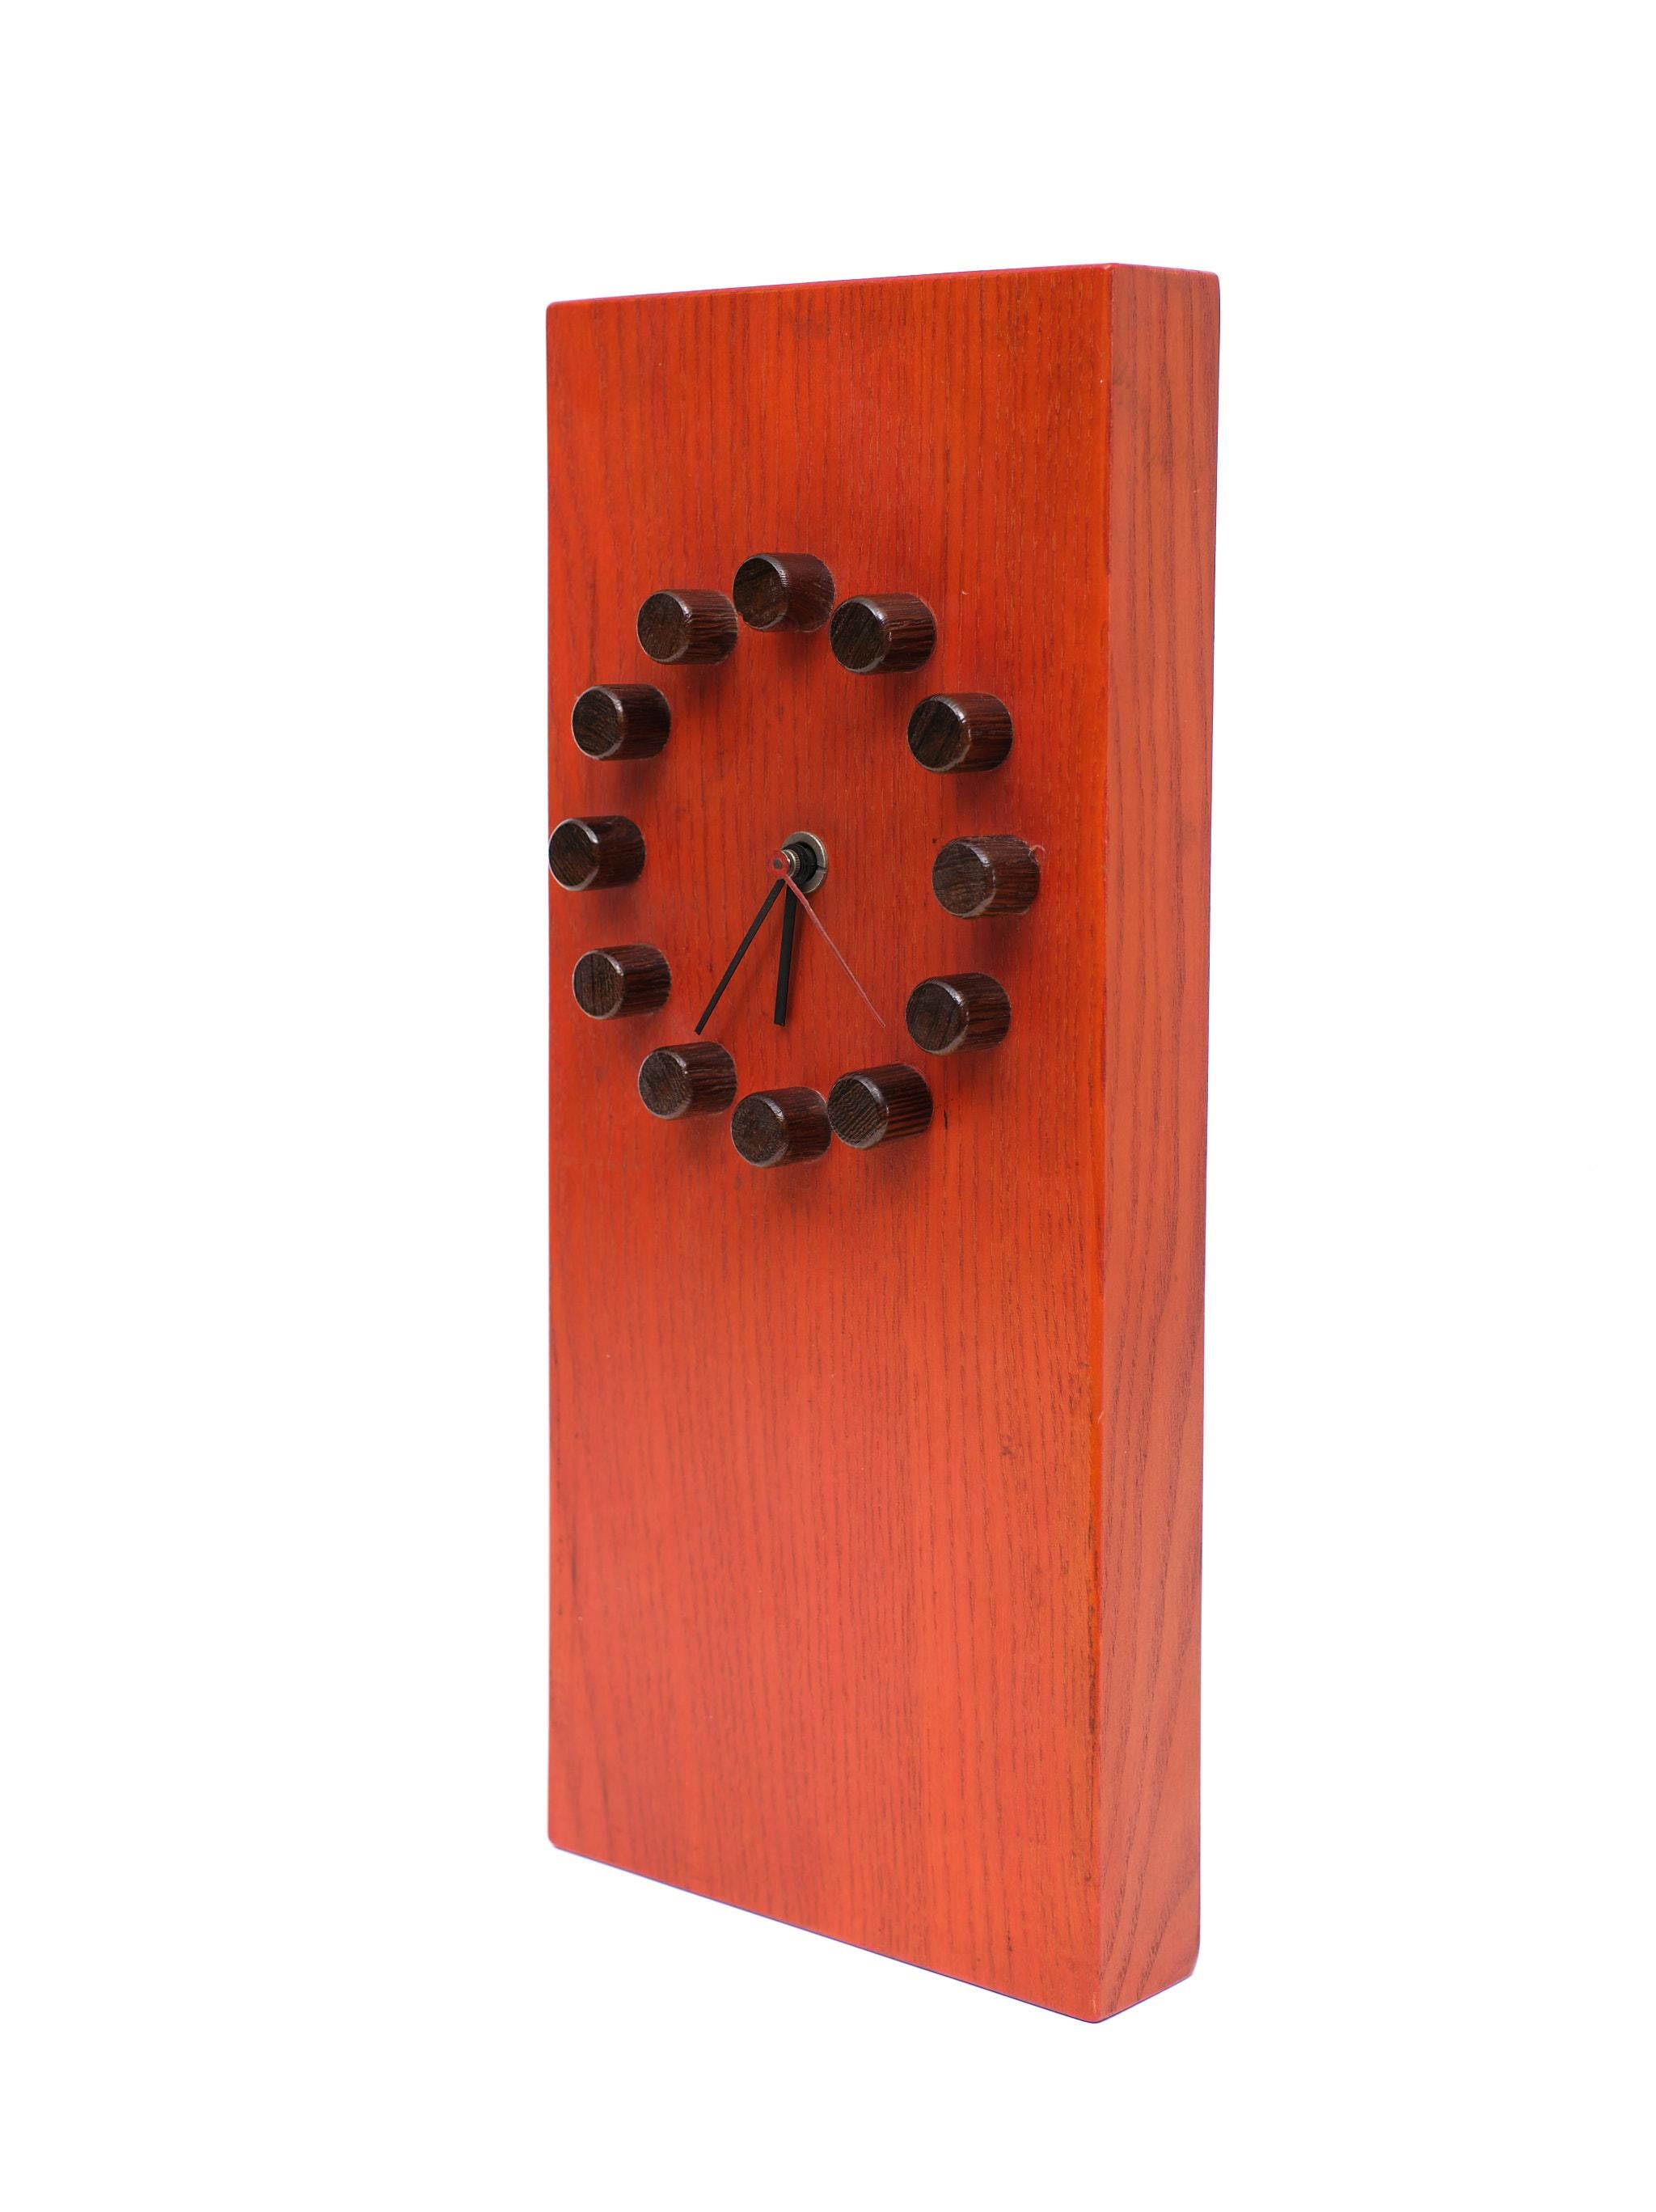 Late 20th Century Wooden Table Clock  1970s Dutch 